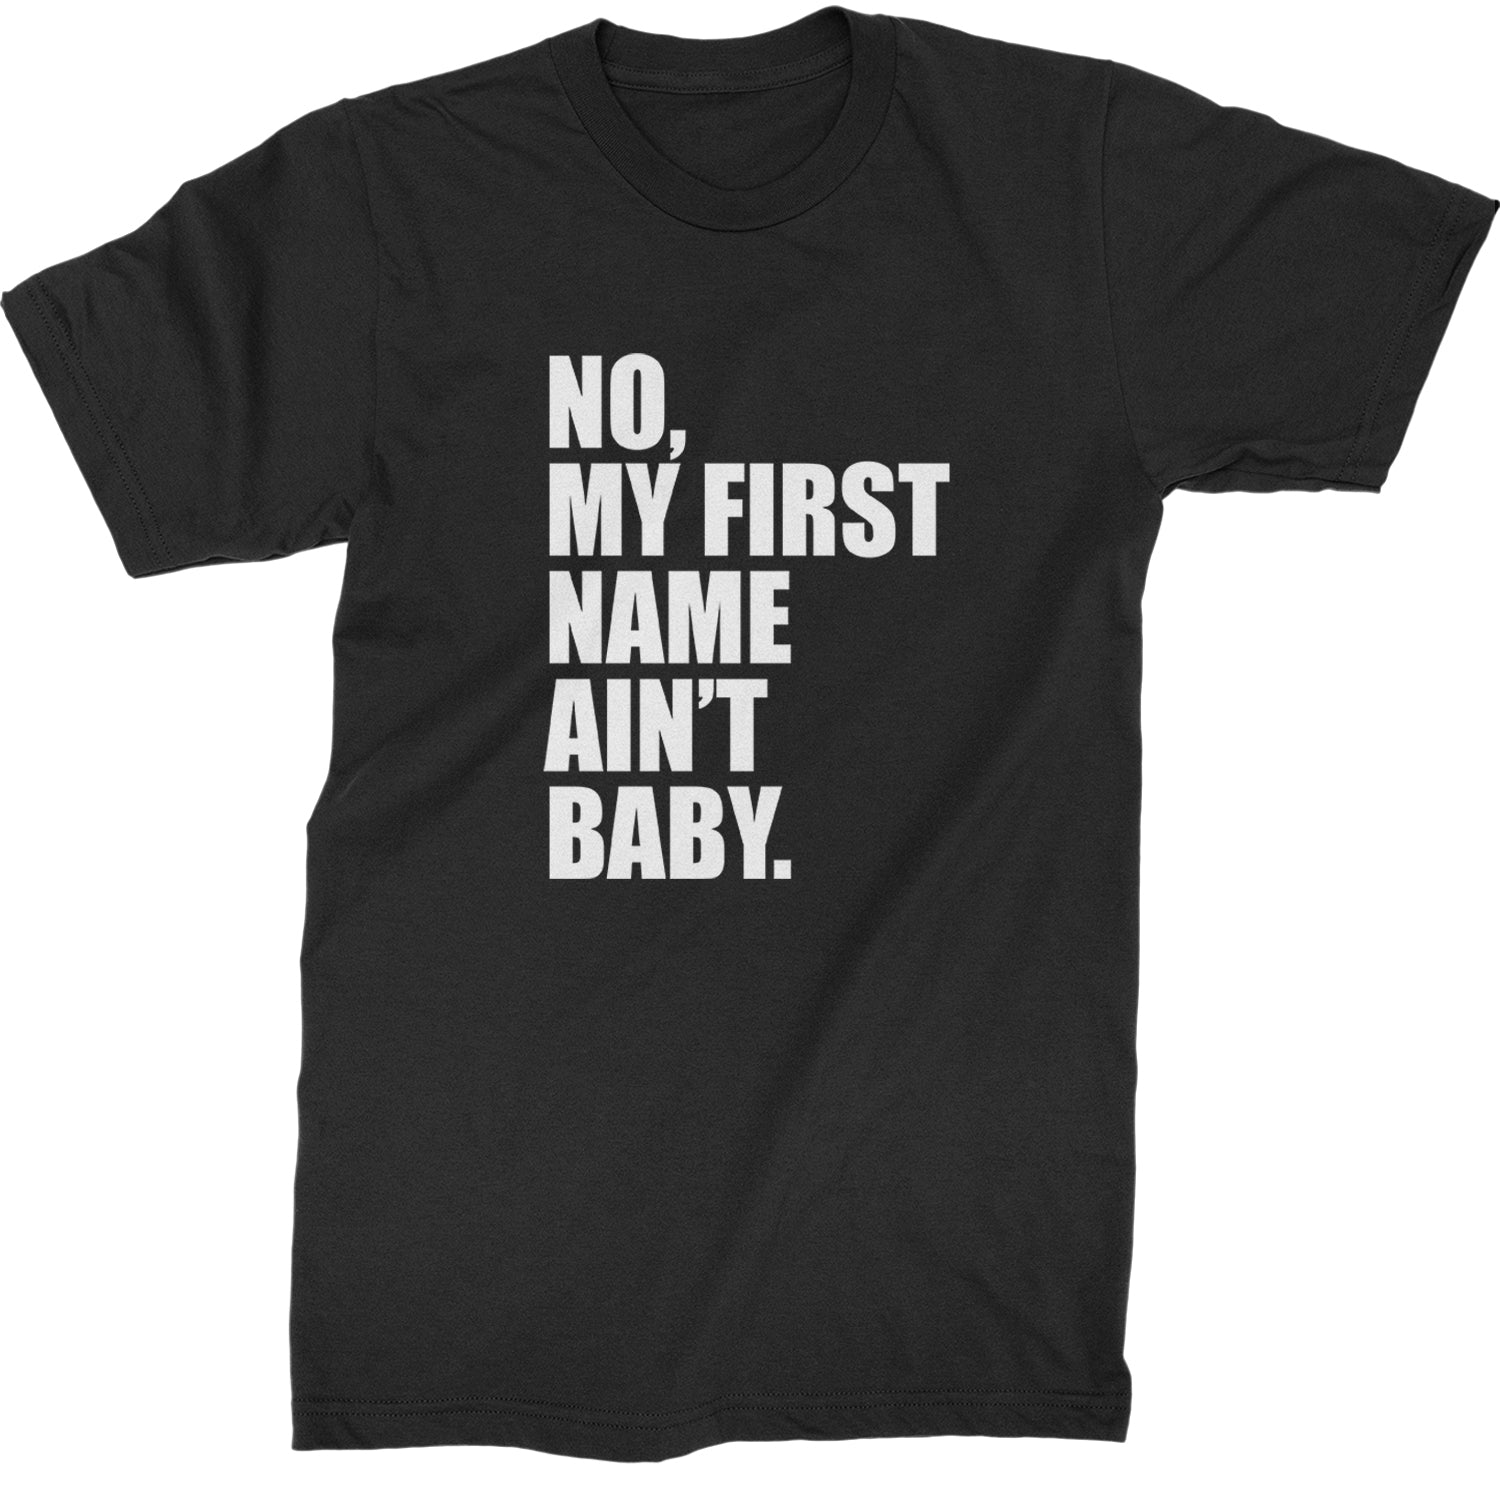 No My First Name Ain't Baby Together Again Mens T-shirt Black